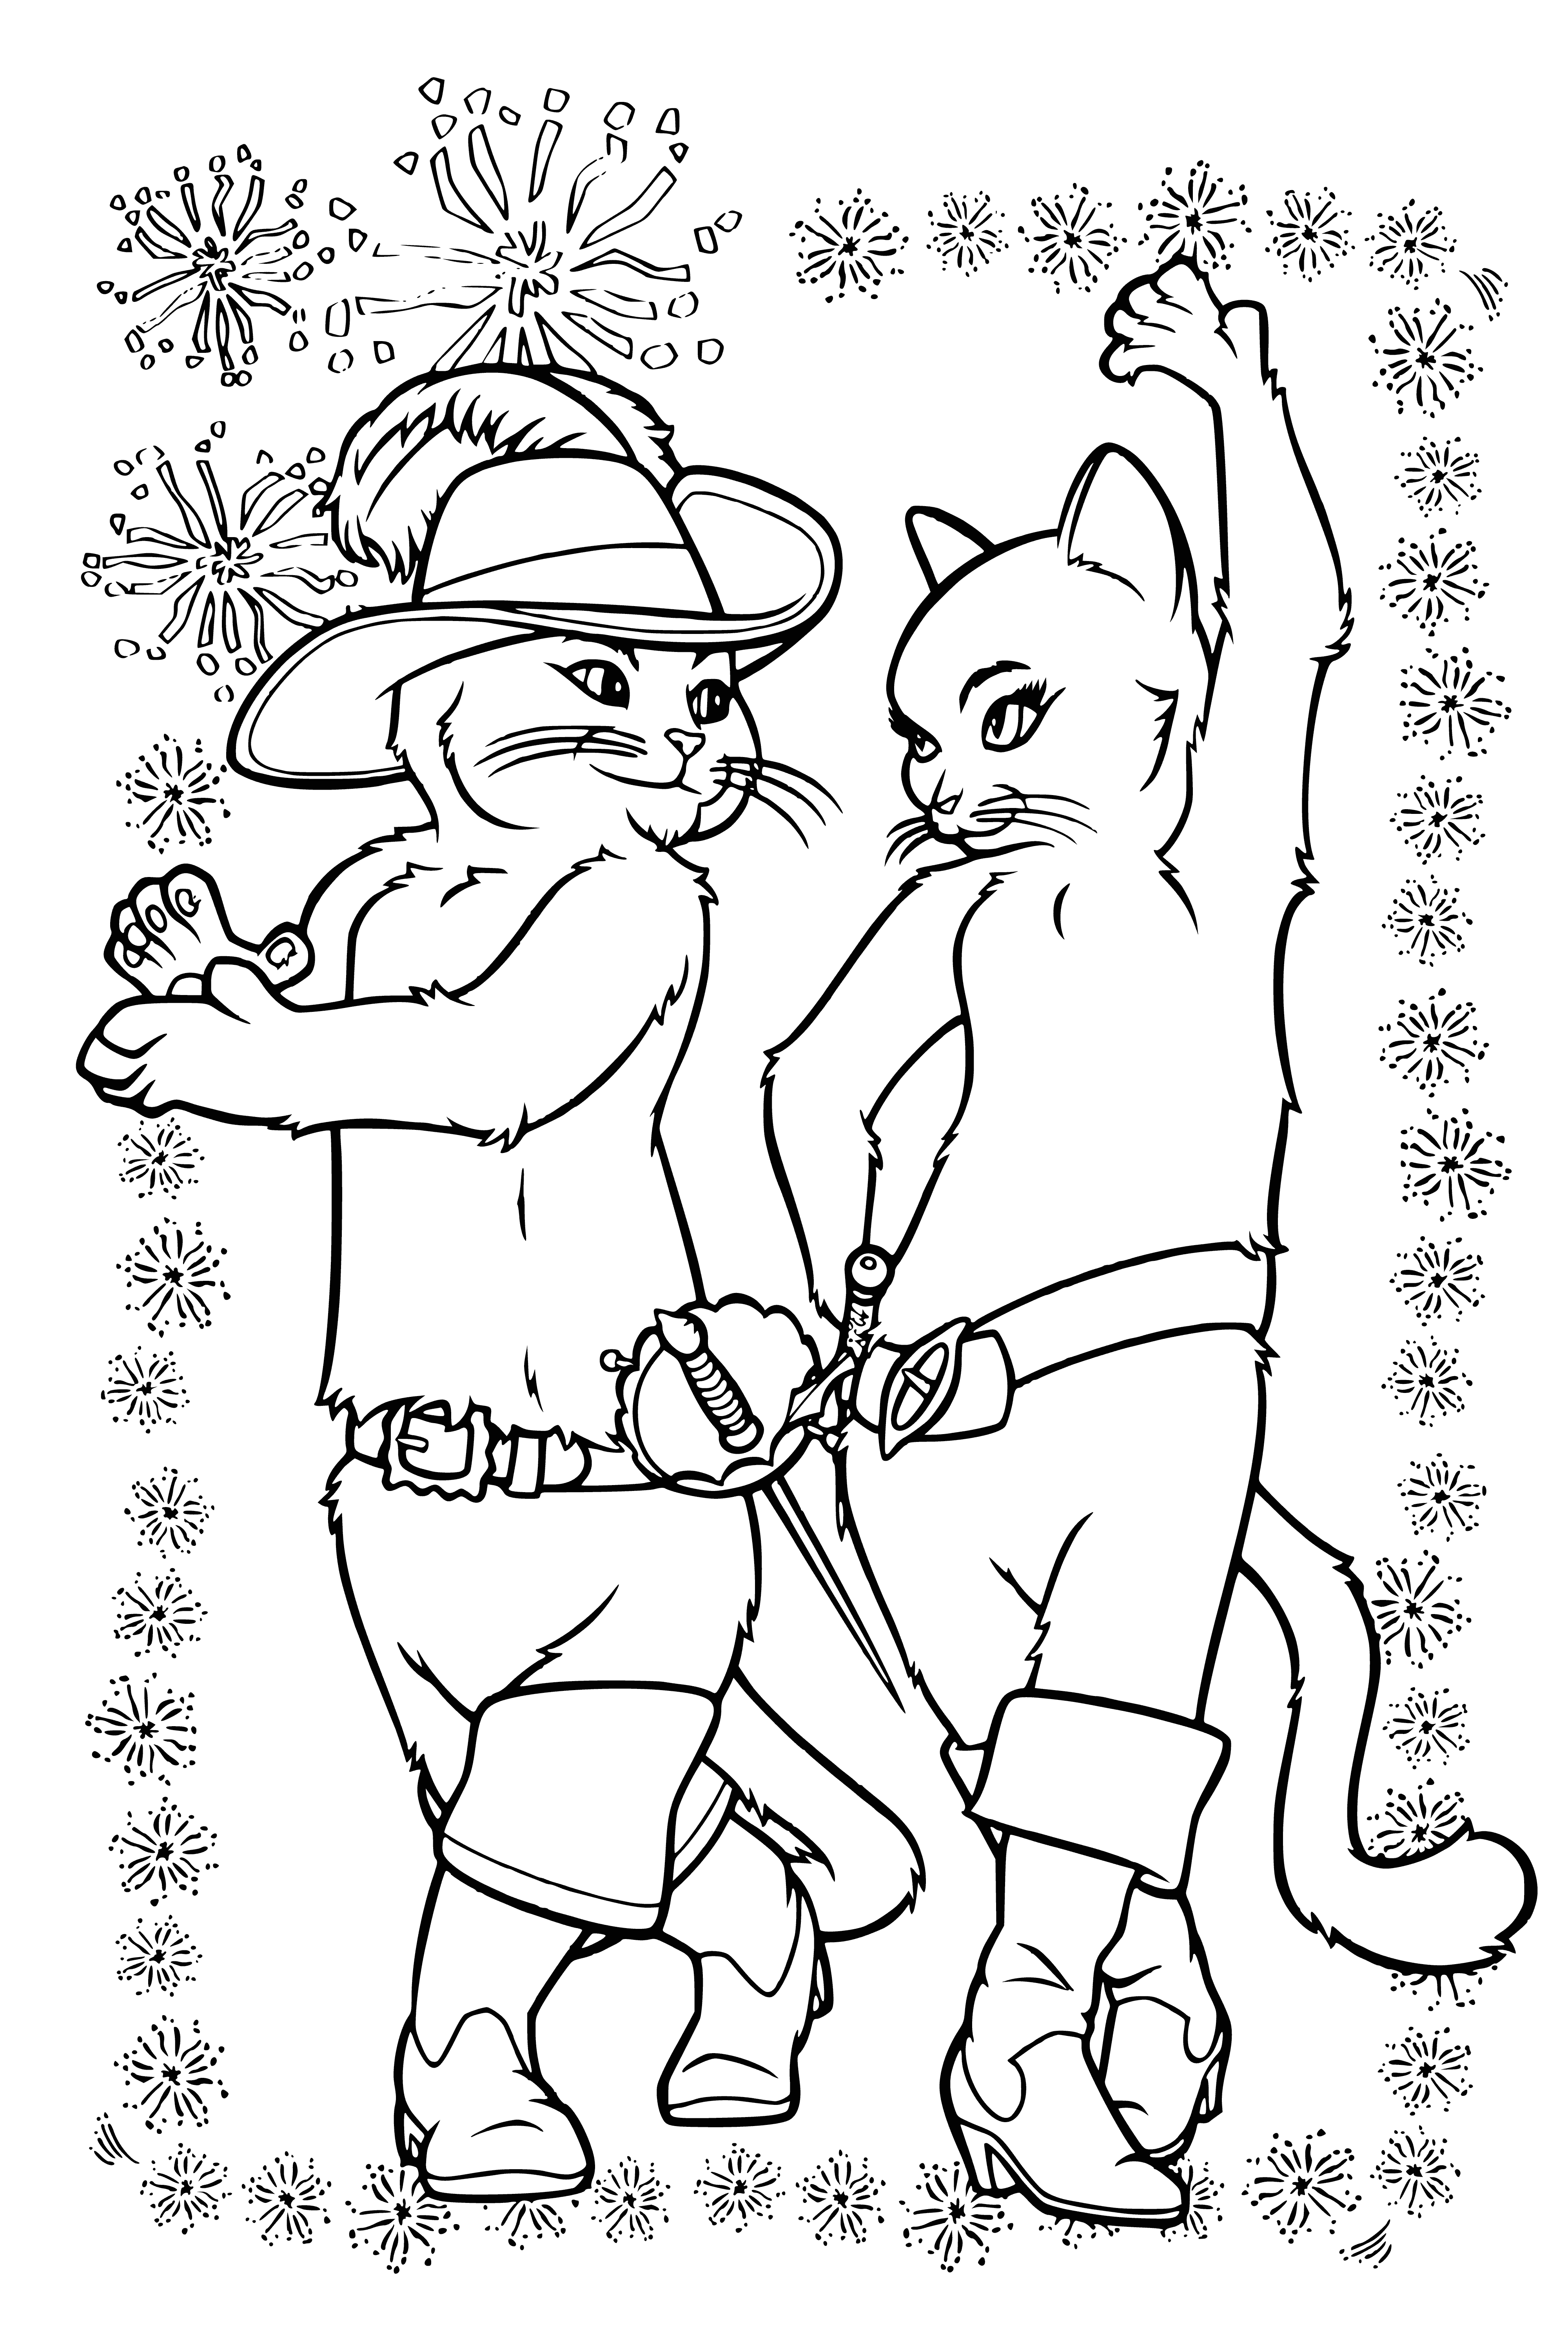 coloring page: Black cat with green eyes, pink nose, and red collar wearing a blue hat stands on hind legs, pawing at air.